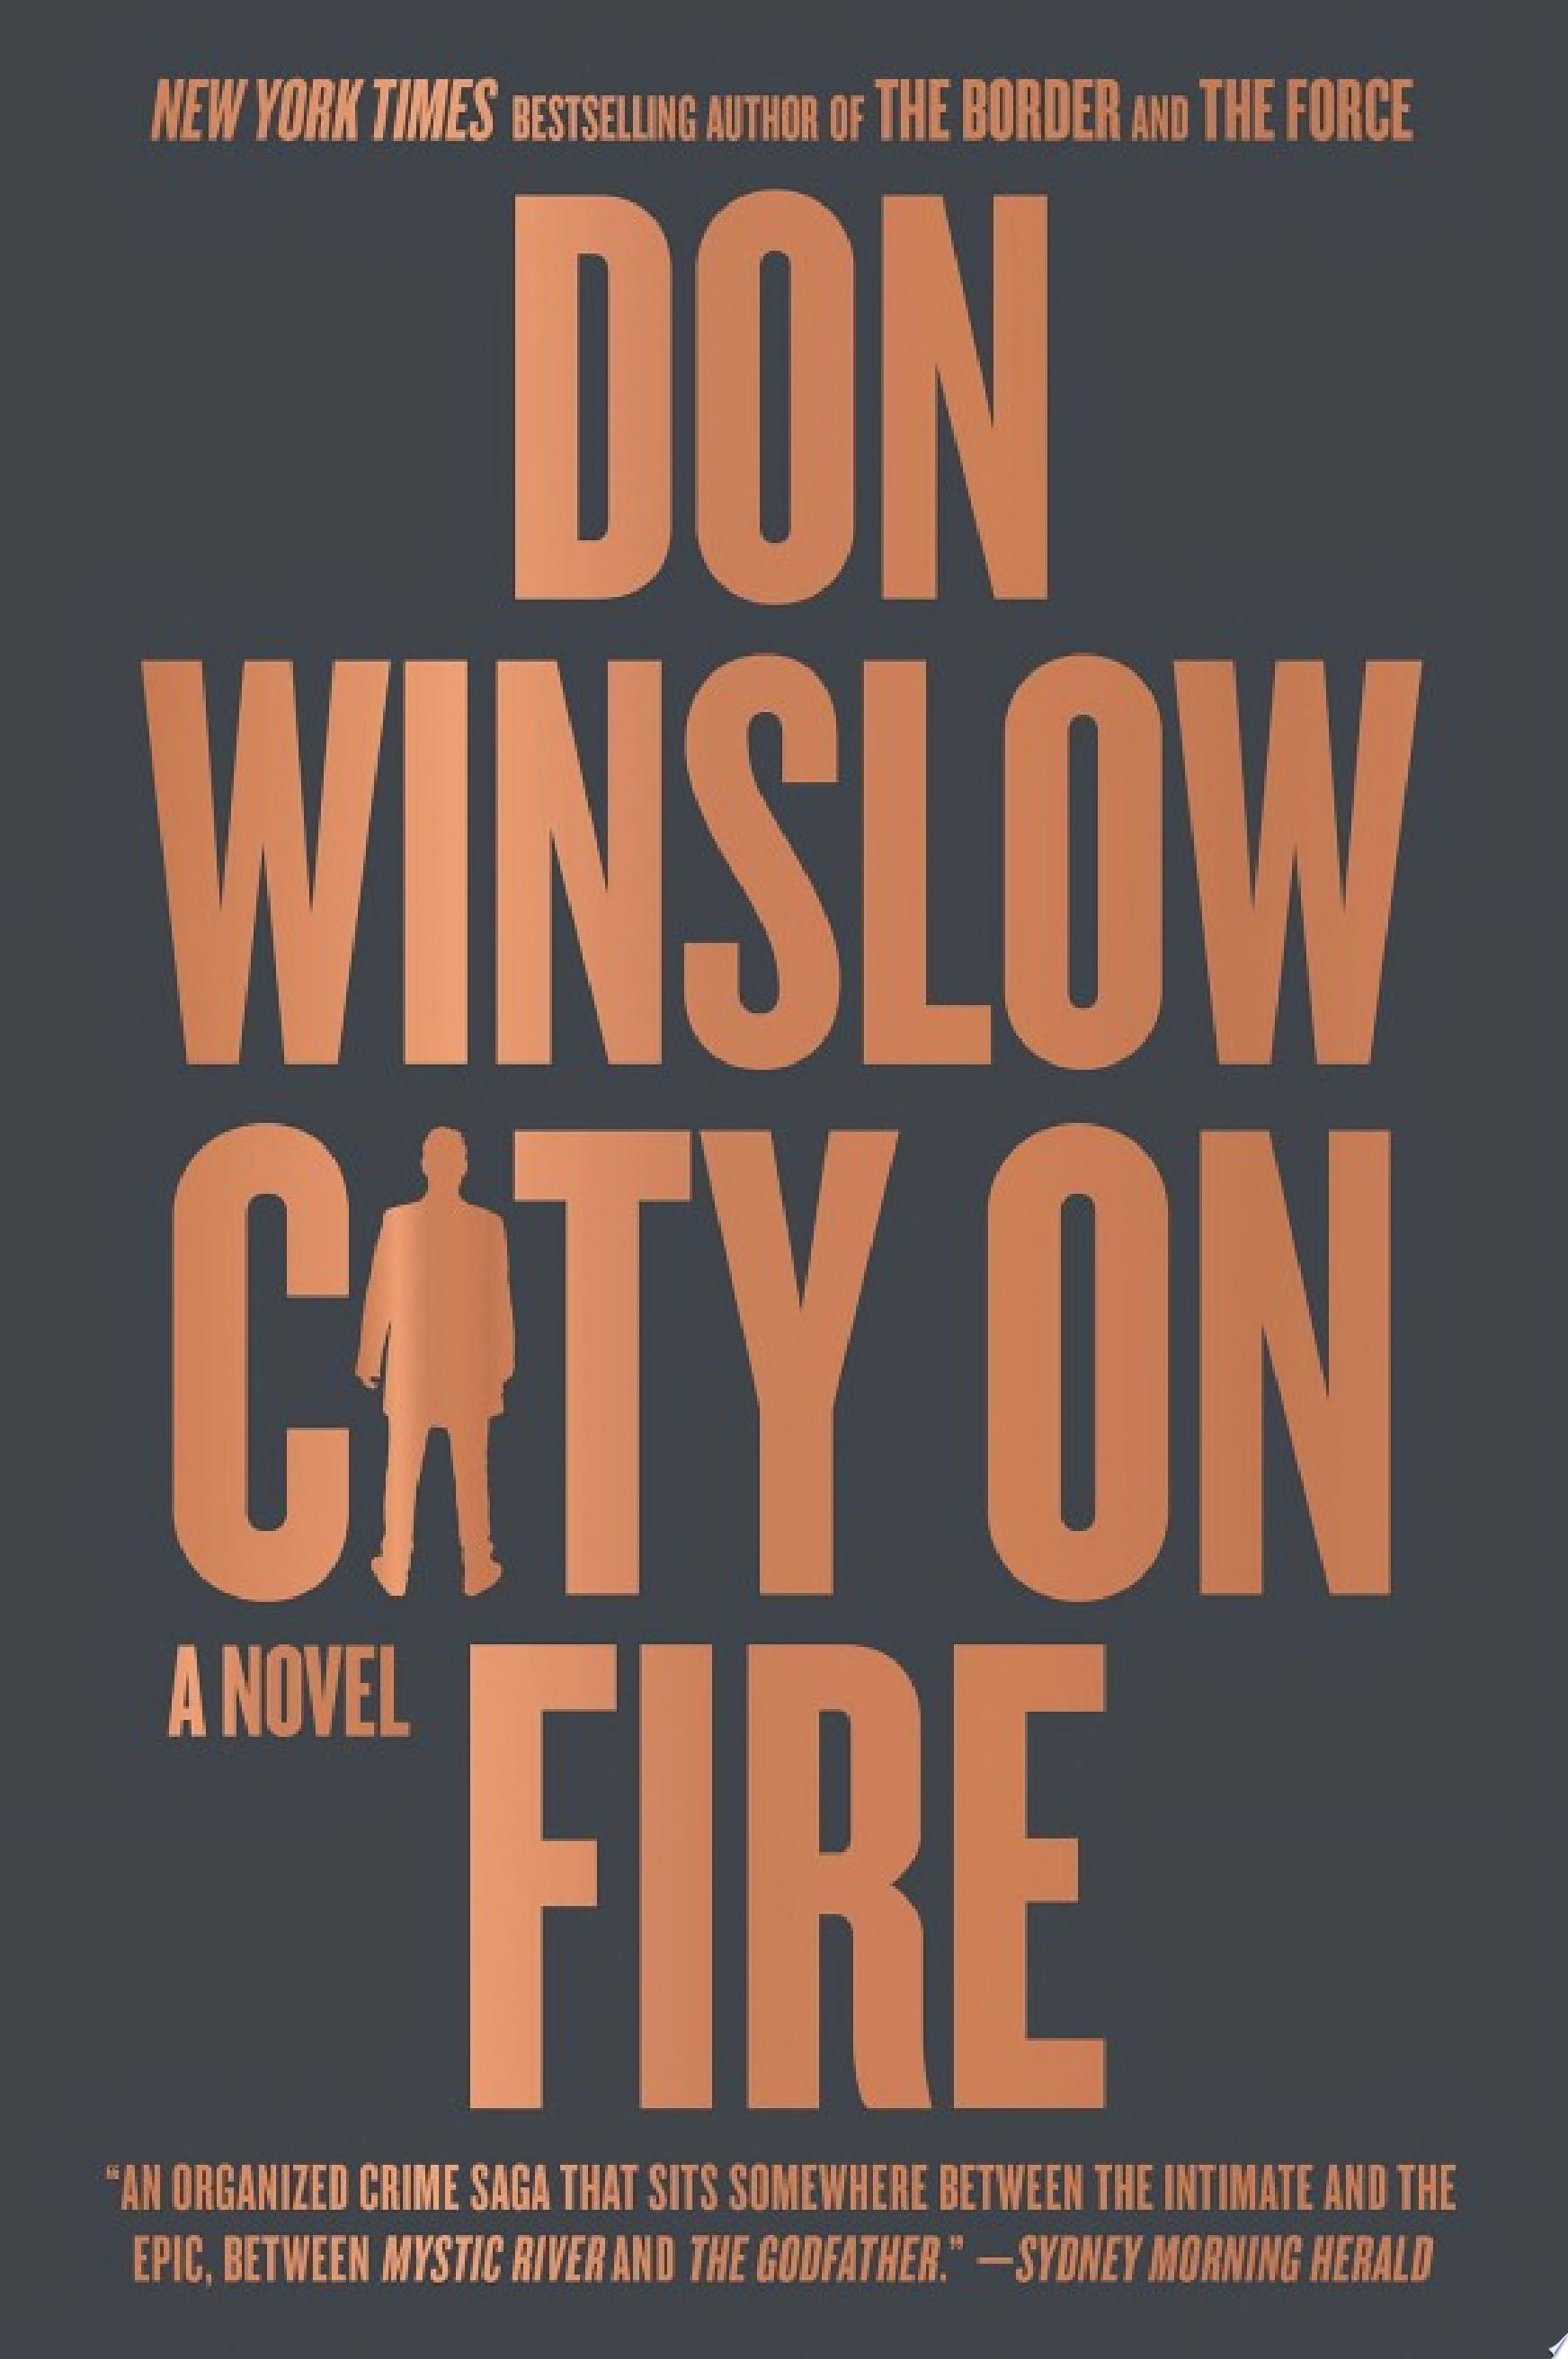 Image for "City on Fire"